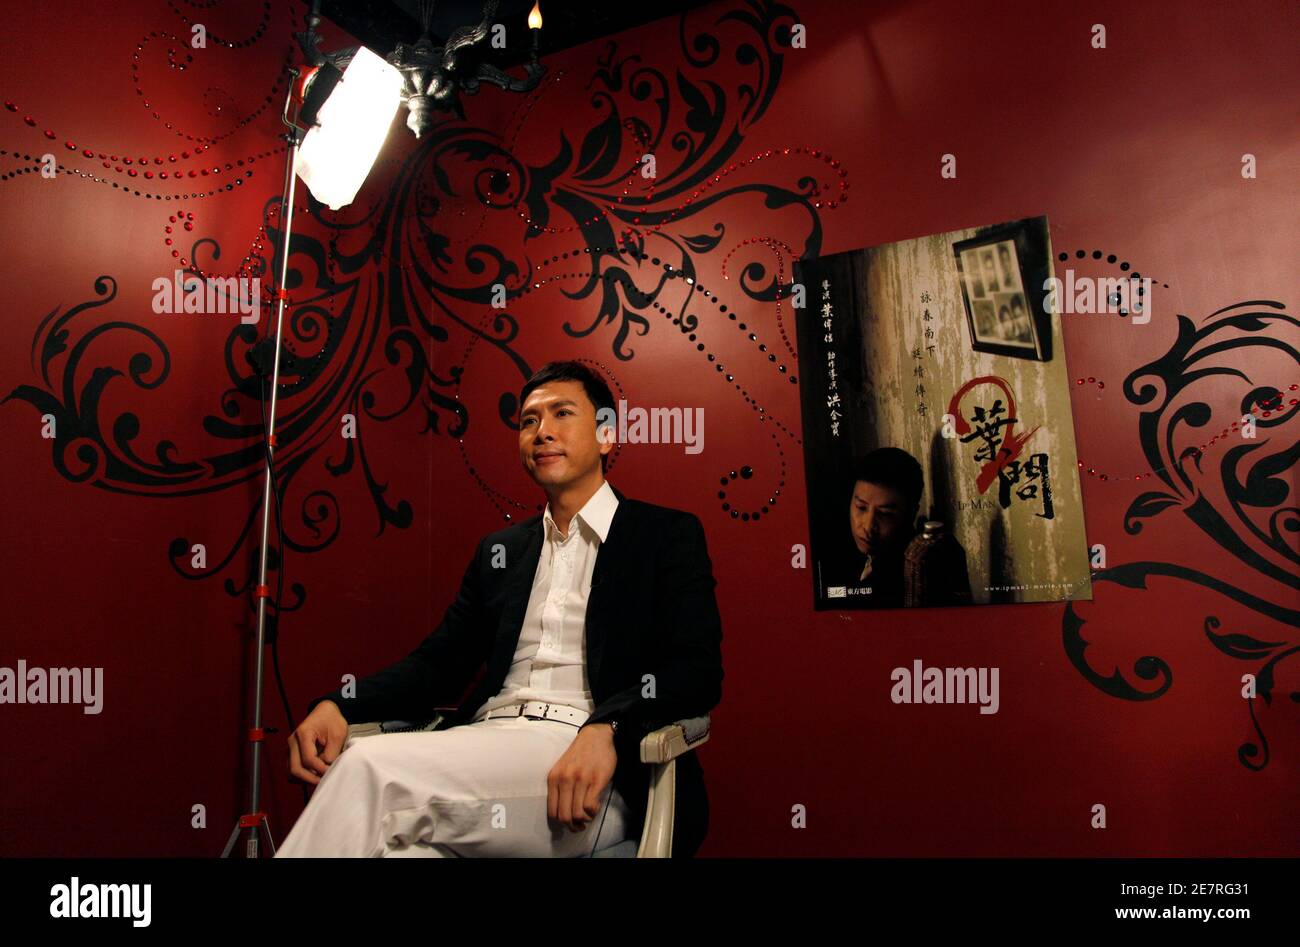 Hong Kong action star Donnie Yen attends an interview with Reuters in Hong Kong March 22, 2010. Donnie is in Hong Kong to promote his new movie 'Ip Man 2'.     REUTERS/Tyrone Siu  (CHINA - Tags: ENTERTAINMENT) Stock Photo